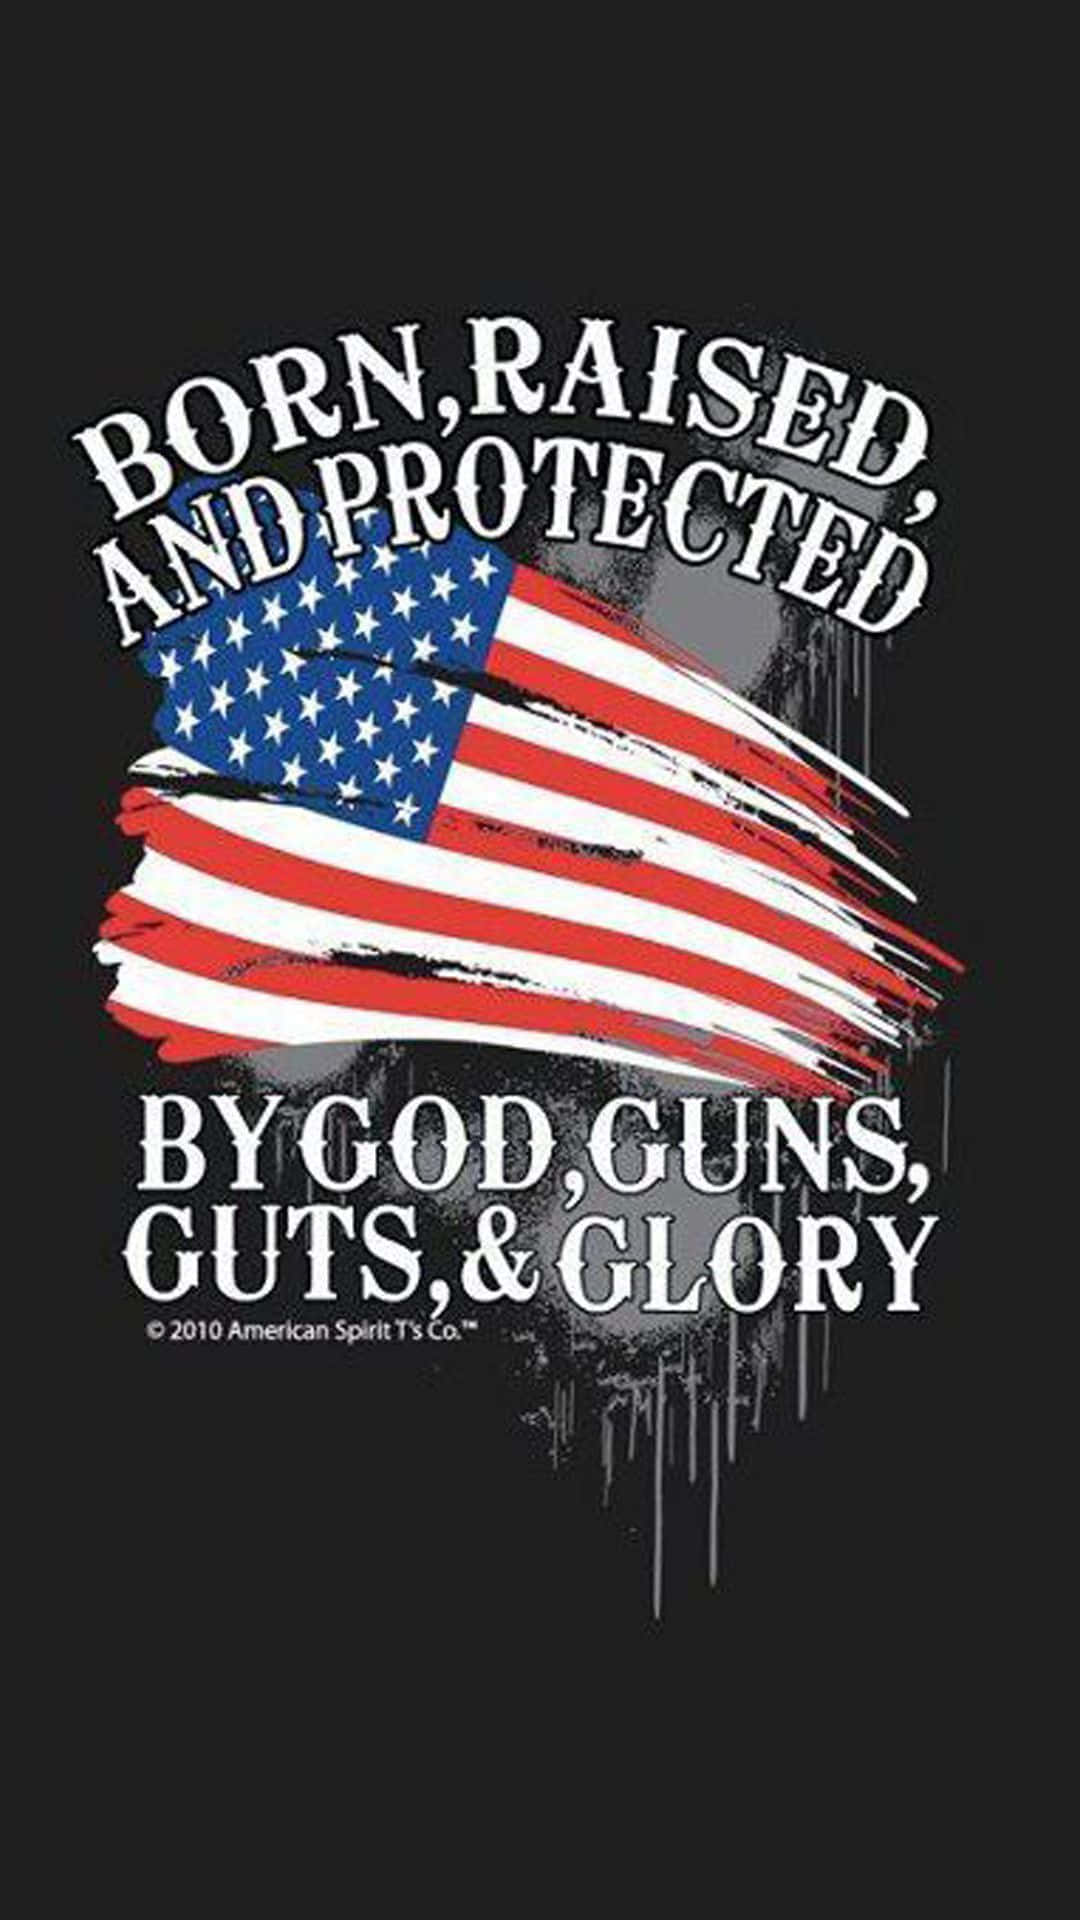 Born, Raised And Protected By God Guns, Guts And Glory T Shirt Wallpaper